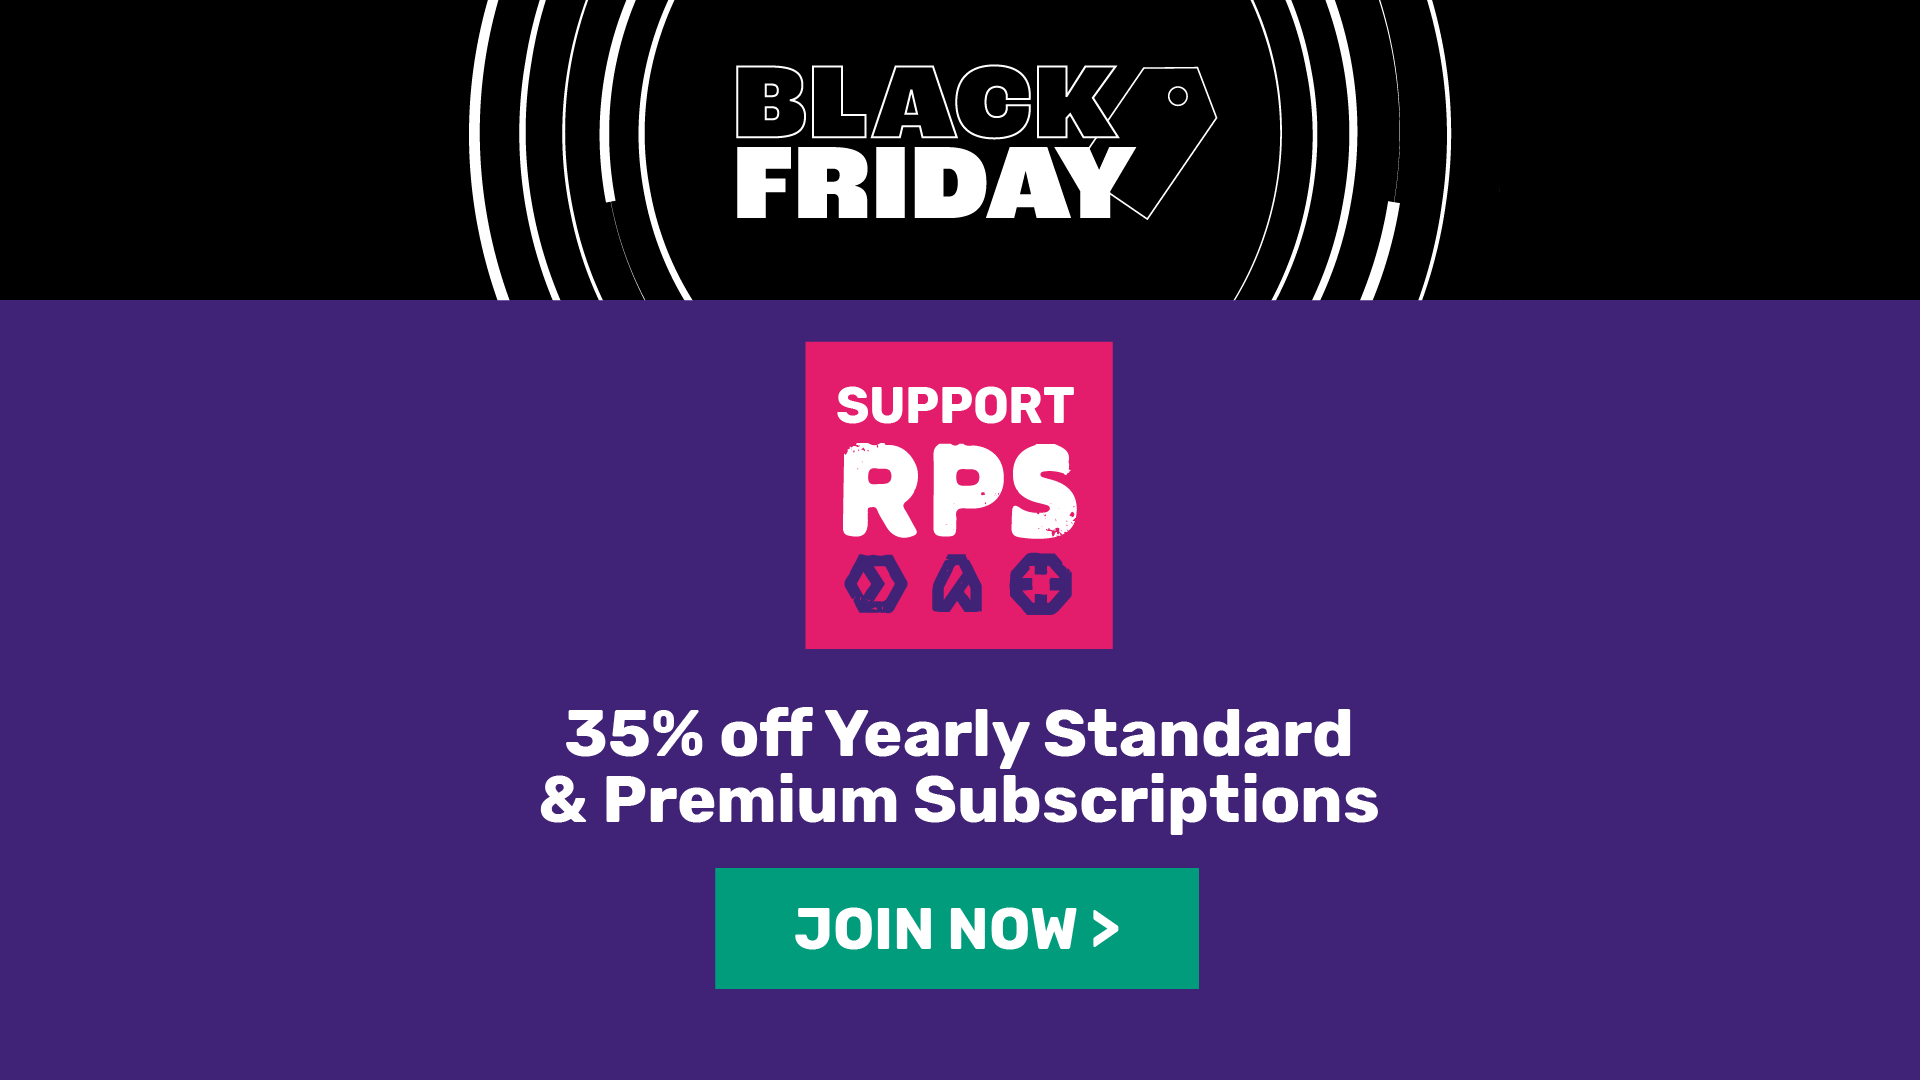 RPS subscriptions are 35% off for Black Friday 2021